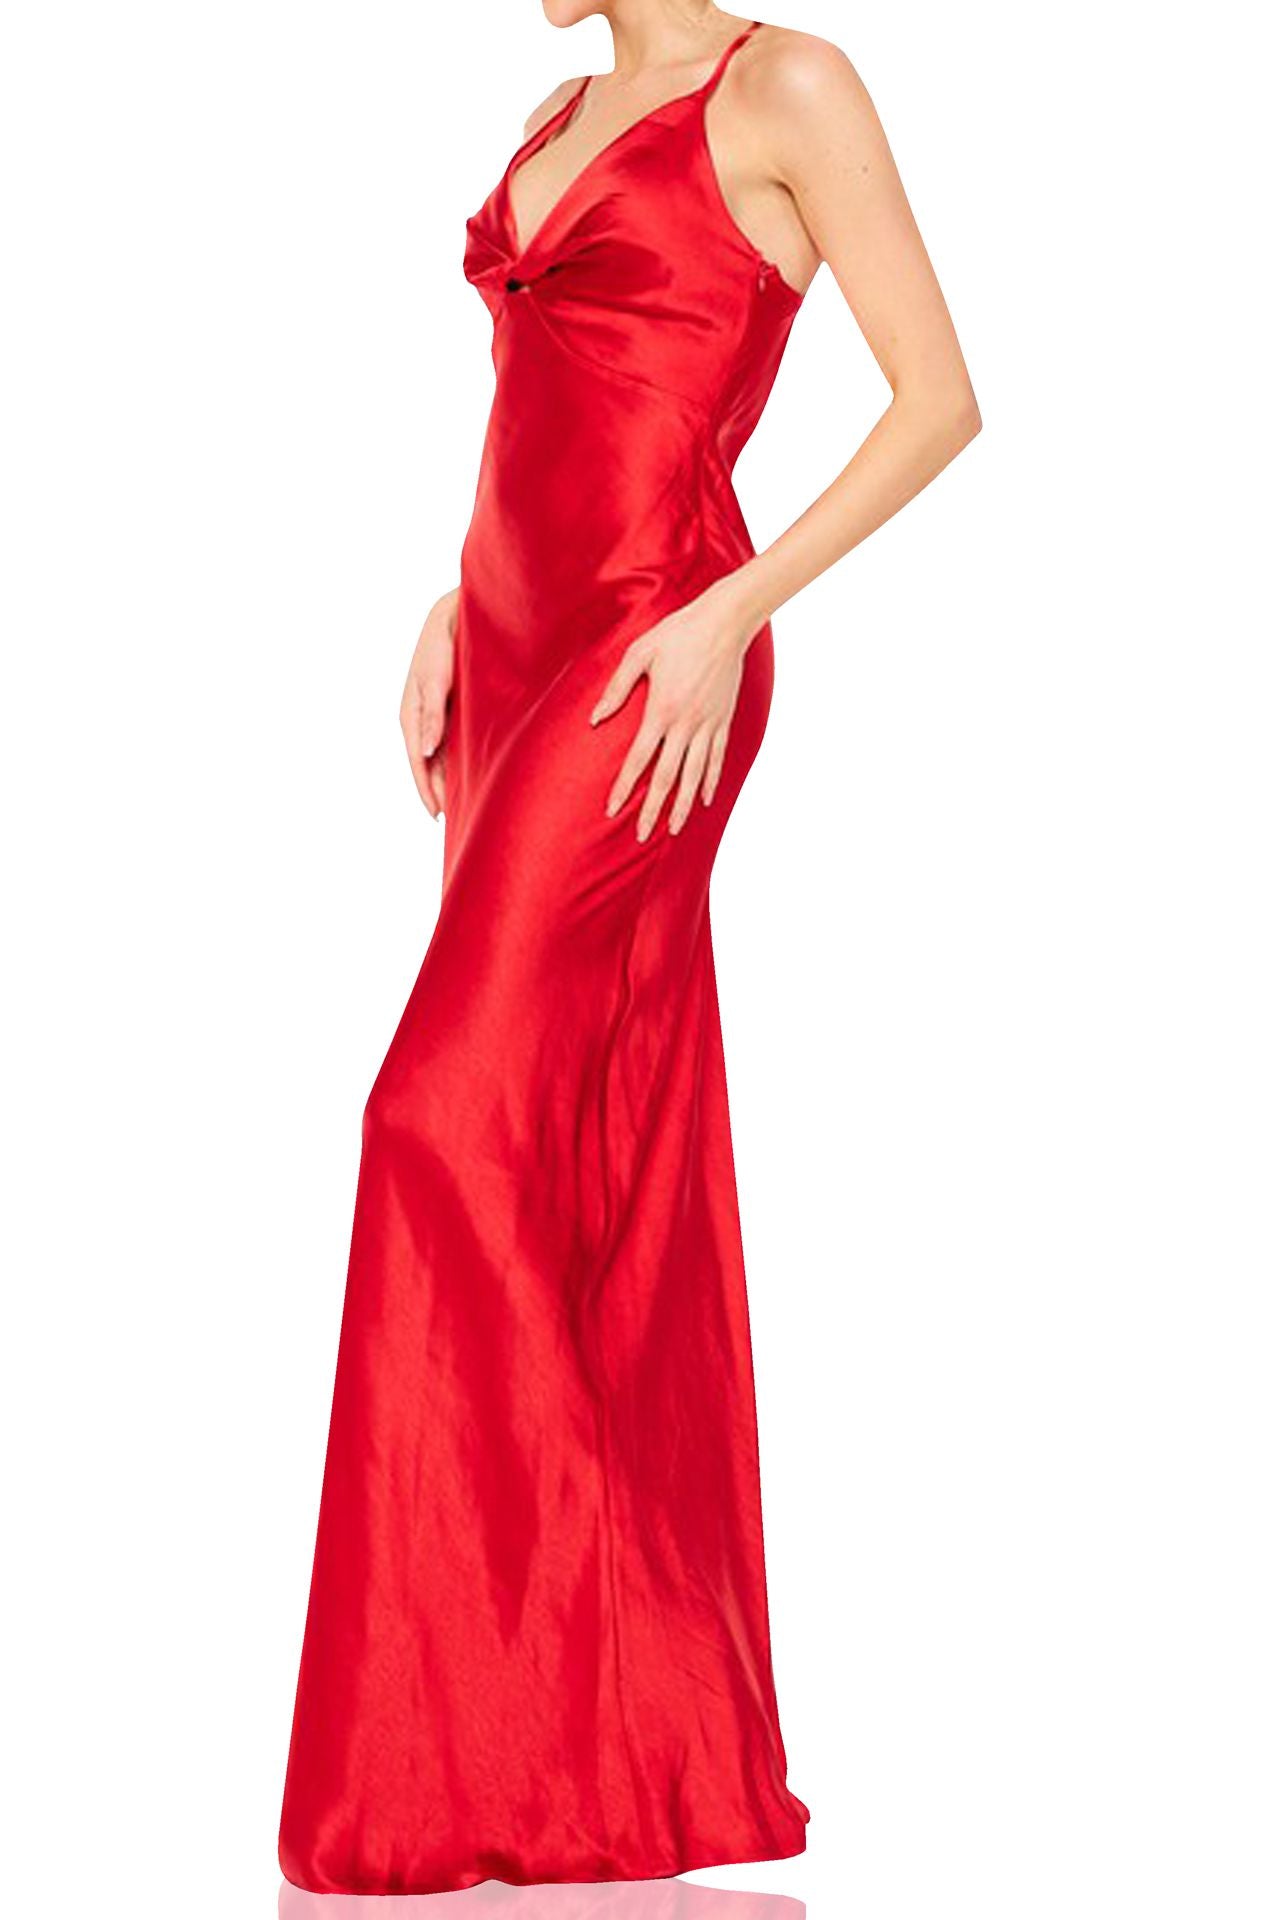 Marchesa Couture Fall 2023 Red Floral Gown - Vivaldi Boutique